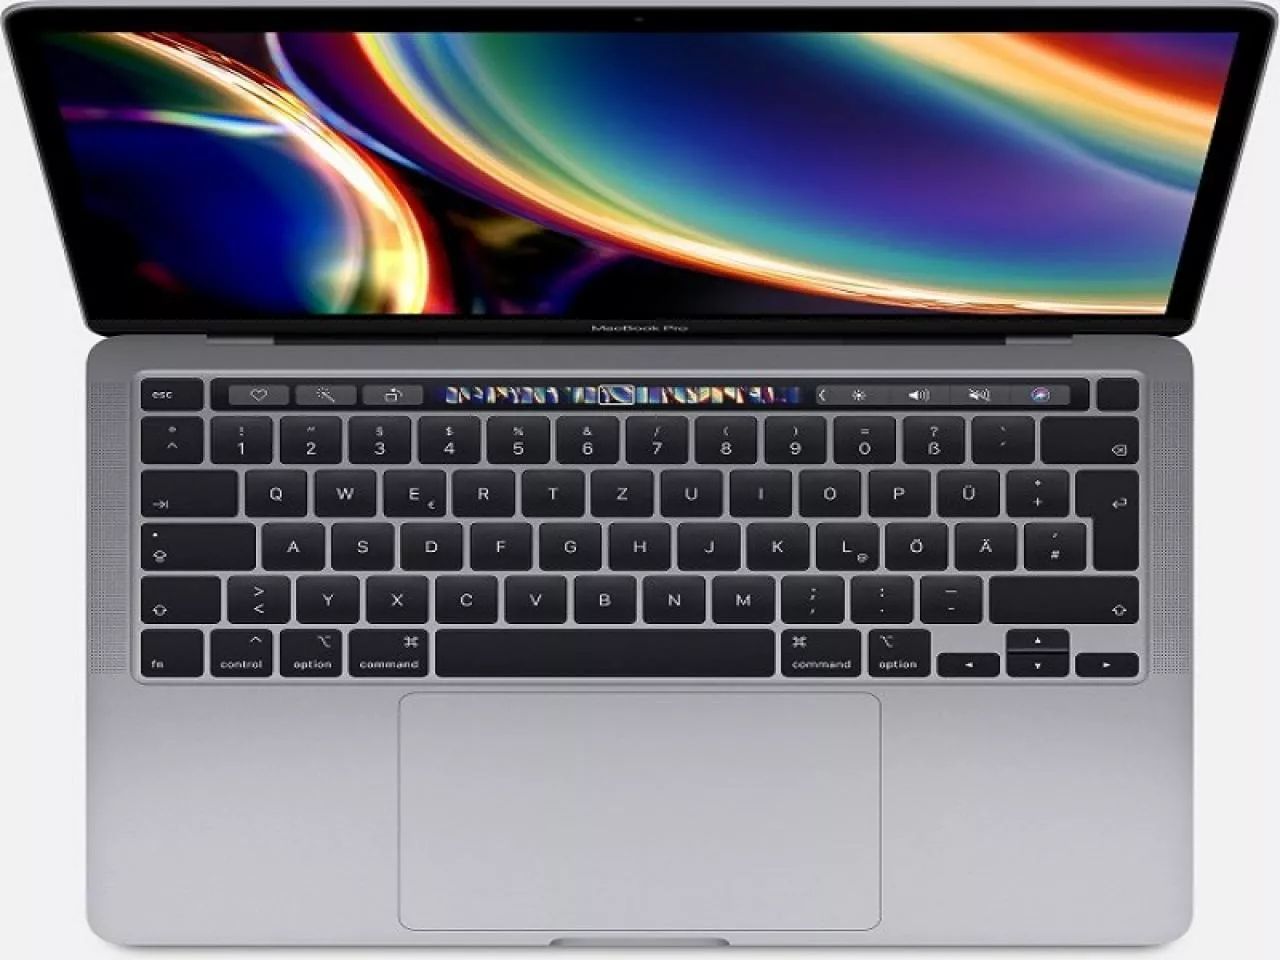 Apple MacBook Pro (13", 2020, Two Thunderbolt 3 ports) space gray, refurbished